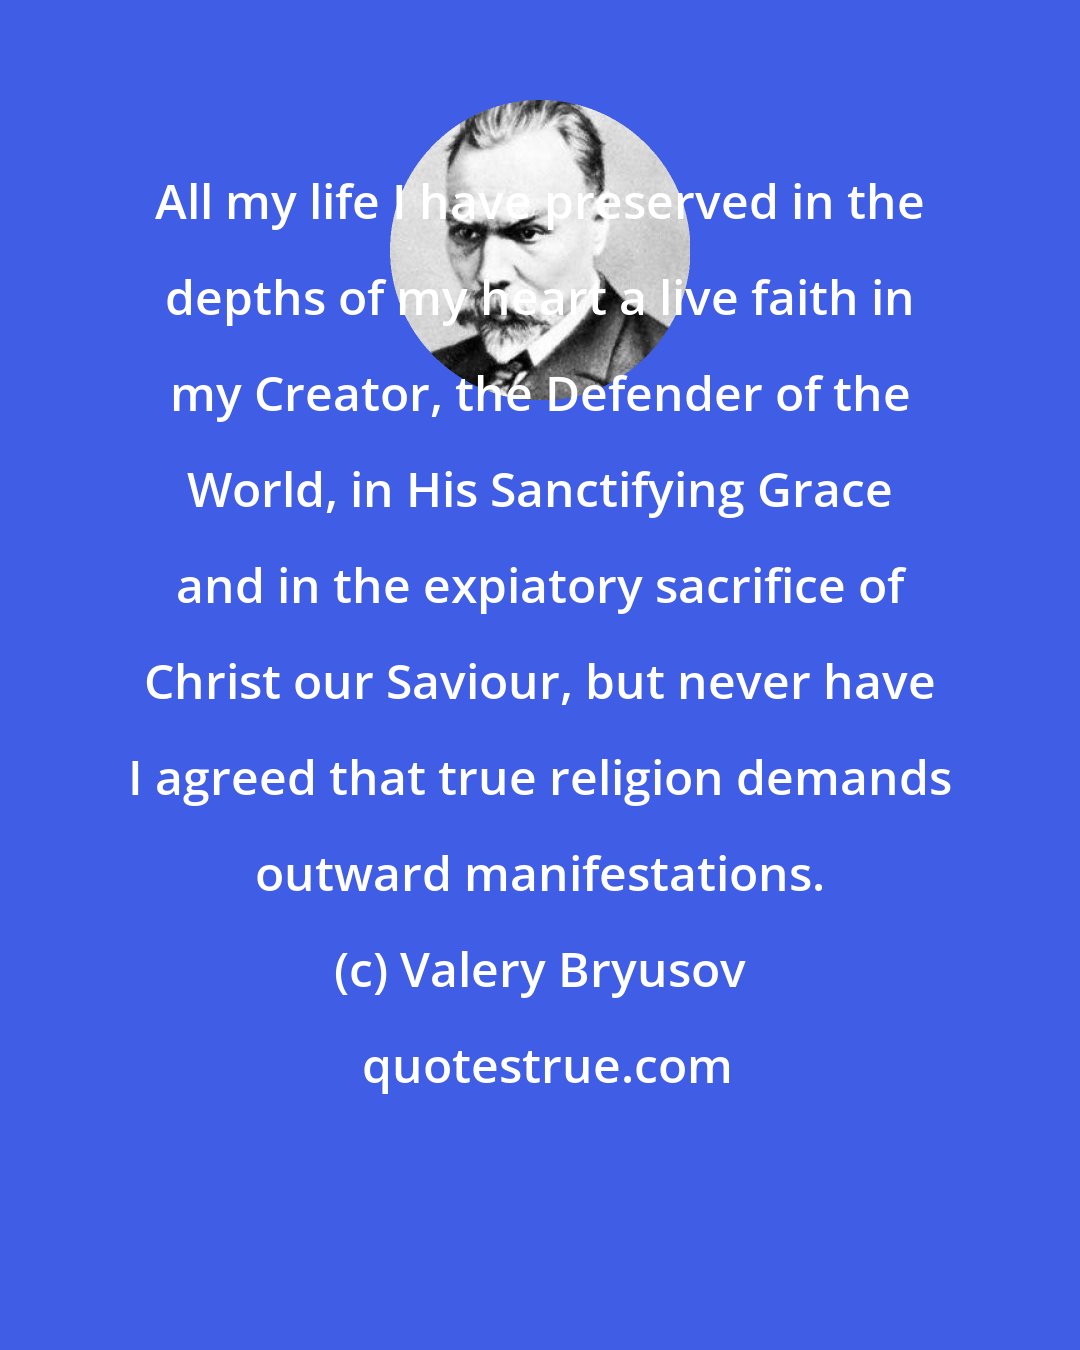 Valery Bryusov: All my life I have preserved in the depths of my heart a live faith in my Creator, the Defender of the World, in His Sanctifying Grace and in the expiatory sacrifice of Christ our Saviour, but never have I agreed that true religion demands outward manifestations.